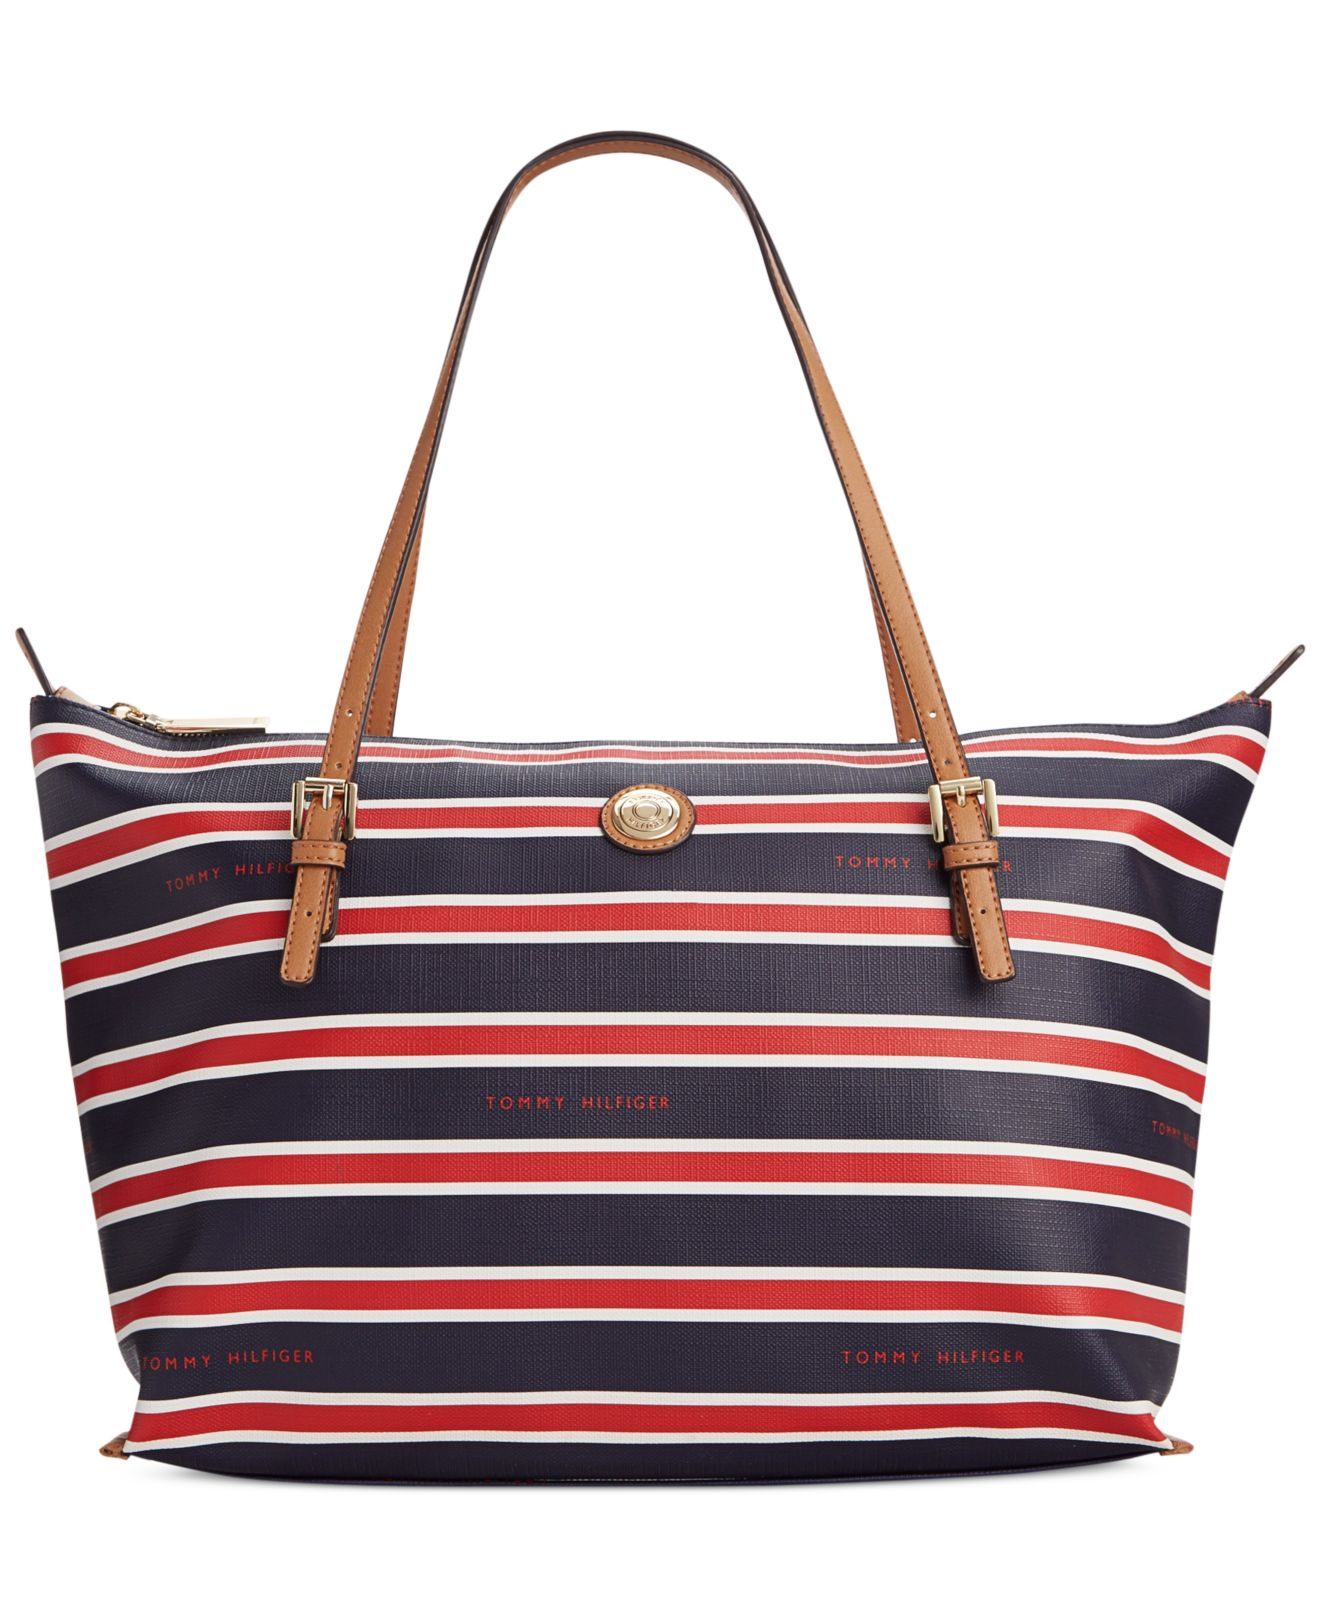 Tommy hilfiger Th Stripe Large Convertible Tote in Blue (Navy/Red) | Lyst